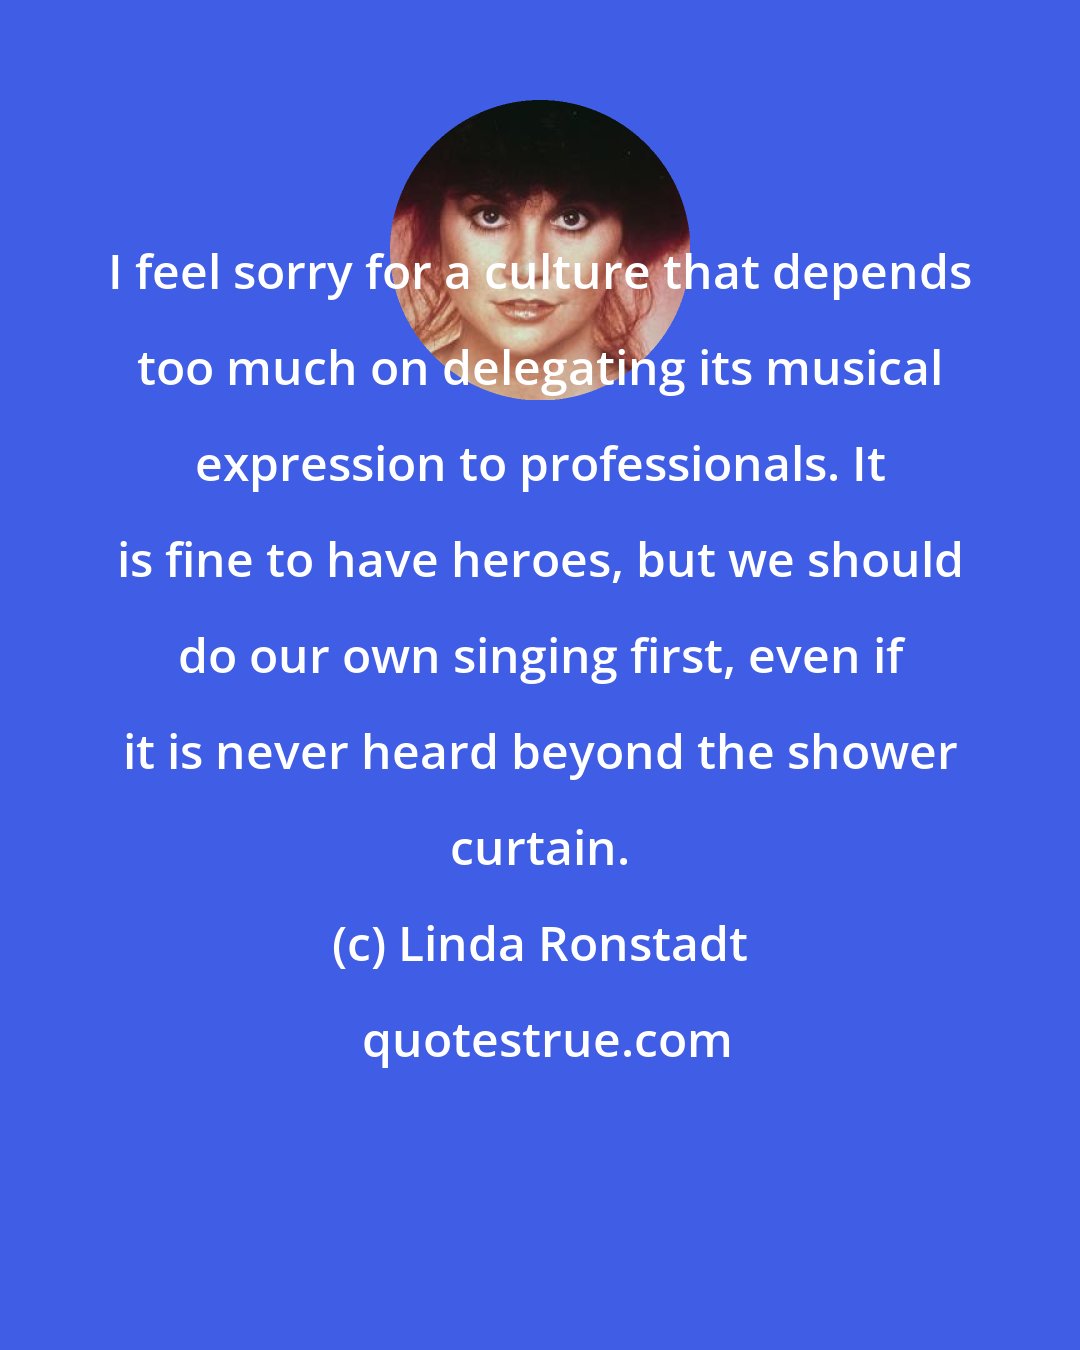 Linda Ronstadt: I feel sorry for a culture that depends too much on delegating its musical expression to professionals. It is fine to have heroes, but we should do our own singing first, even if it is never heard beyond the shower curtain.